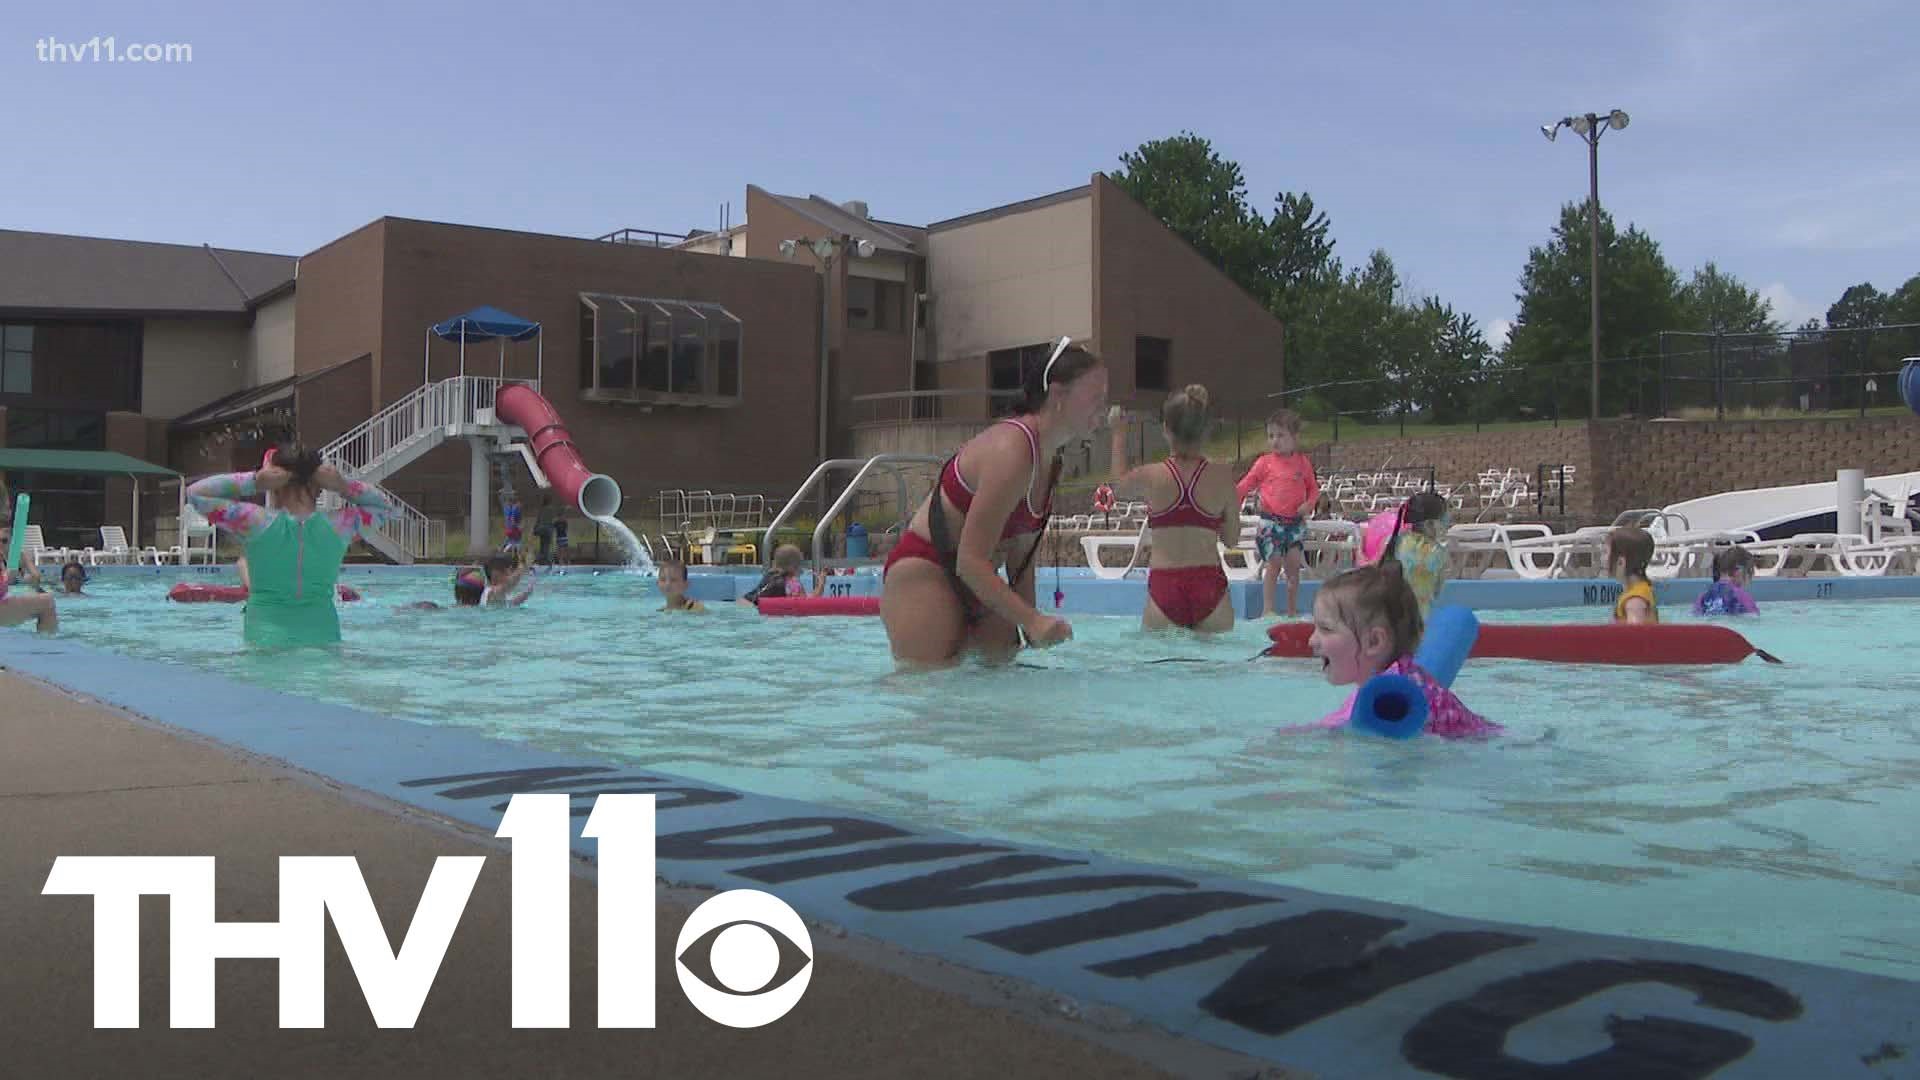 With temperatures rising quickly, many are planning on going to go swim. With more people hitting the water, lifeguards in the state are urging safety.